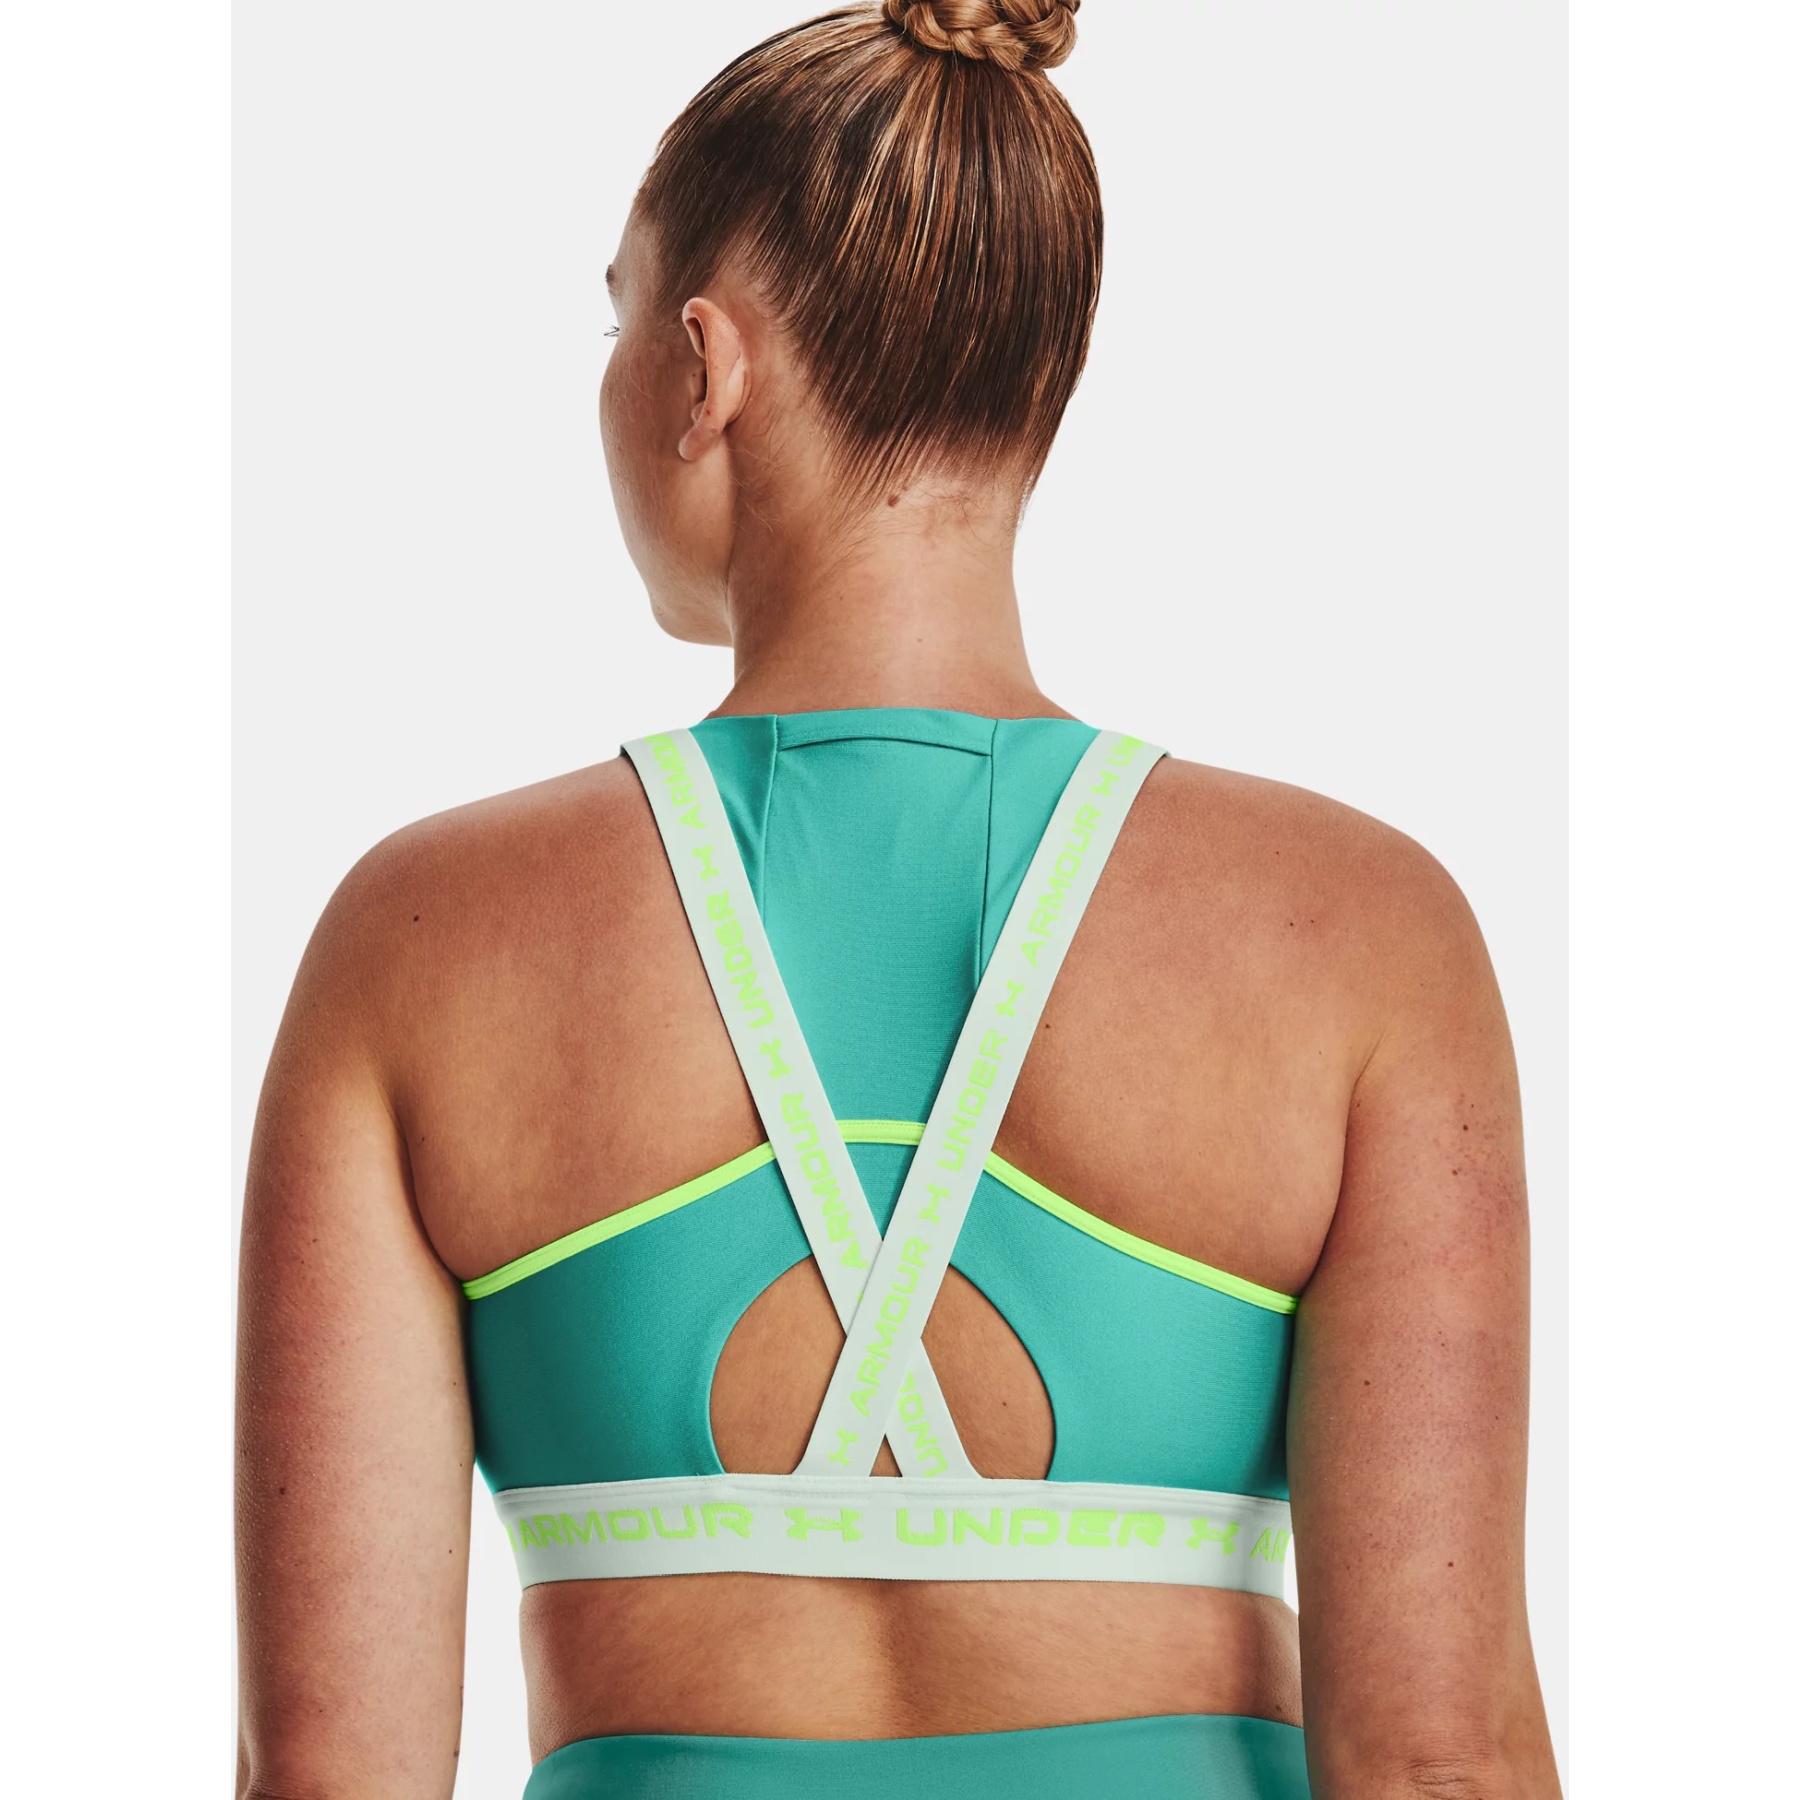 https://images.bike24.com/i/mb/d5/aa/e3/under-armour-womens-armour-mid-crossback-pocket-sports-bra-neptune-sea-mist-quirky-lime-12-1158760.jpg